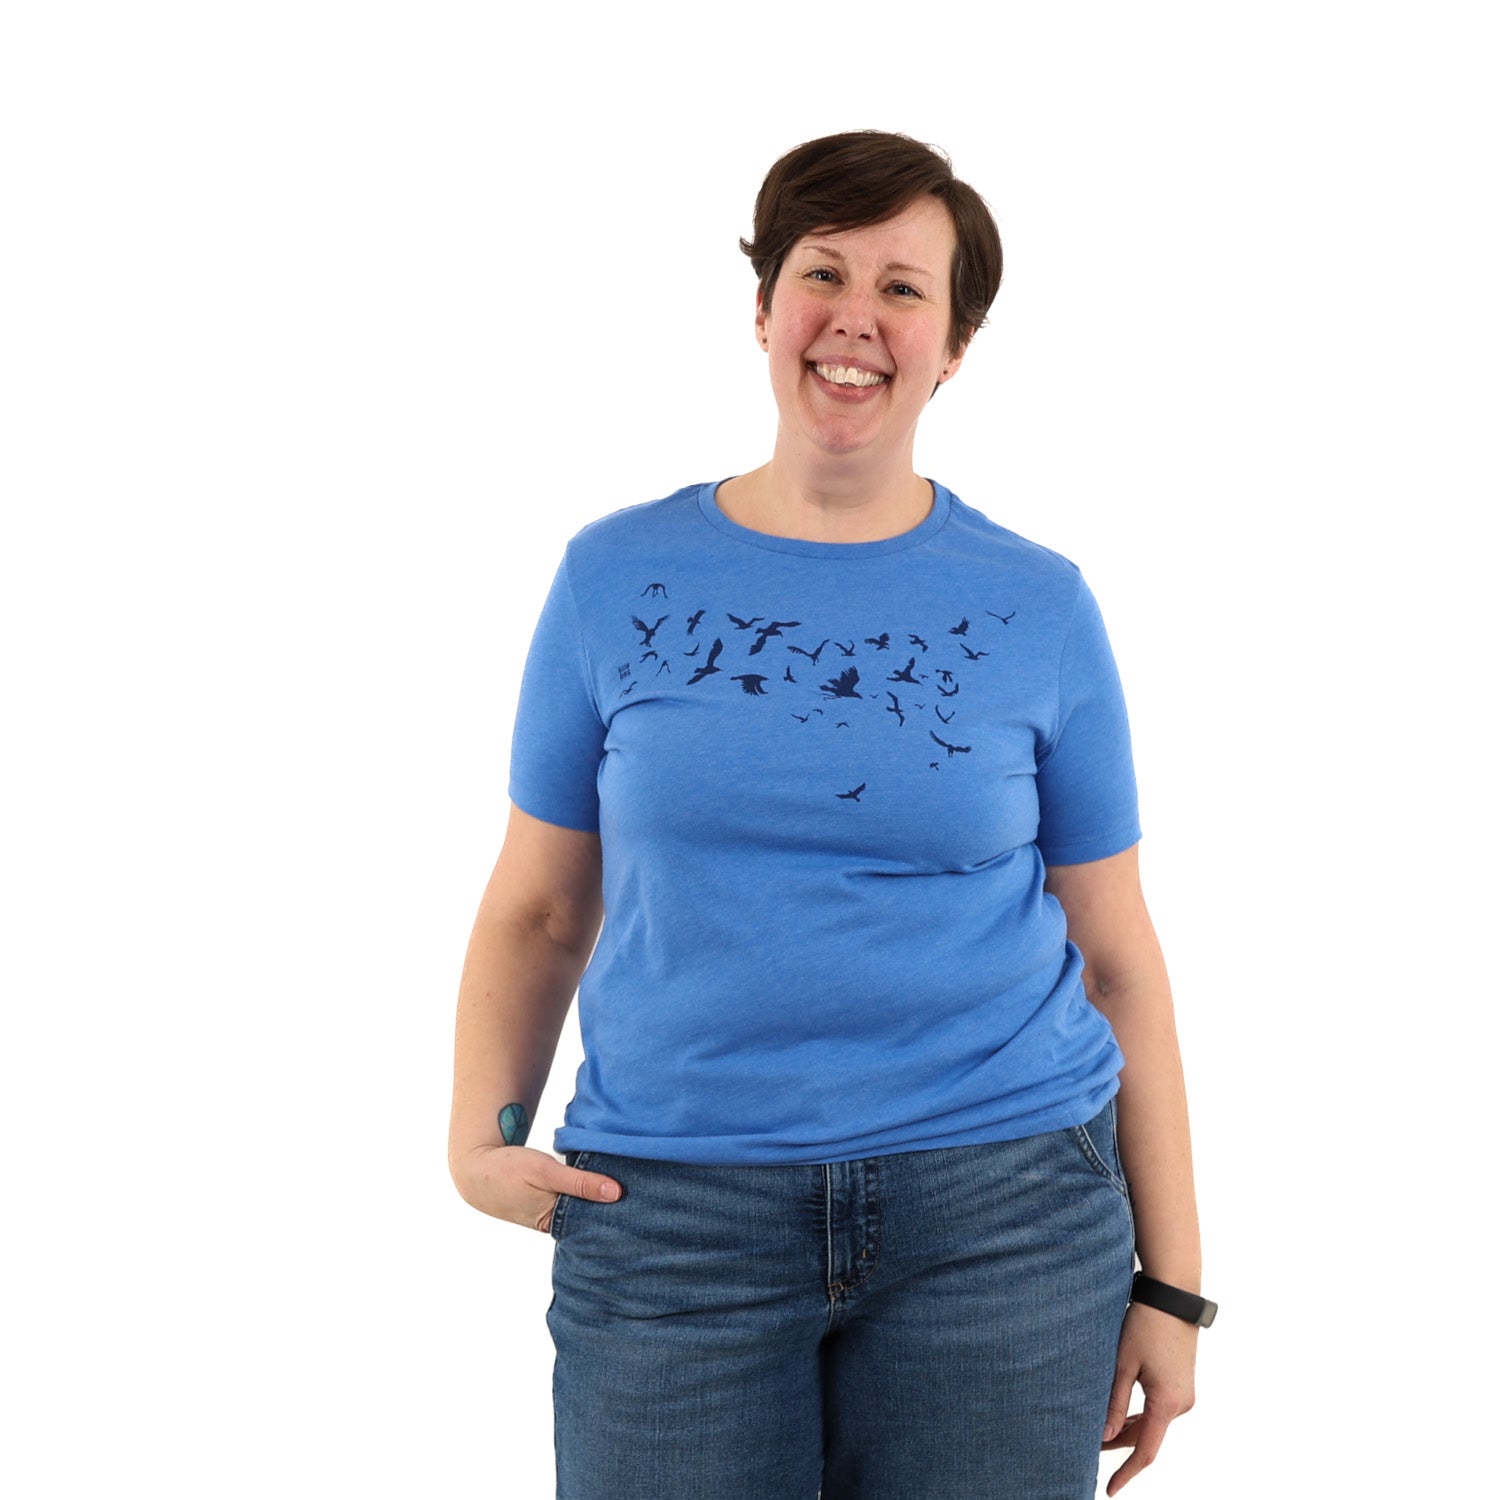 Woman wearing a blue t shirt with birds screen printed across the chest.